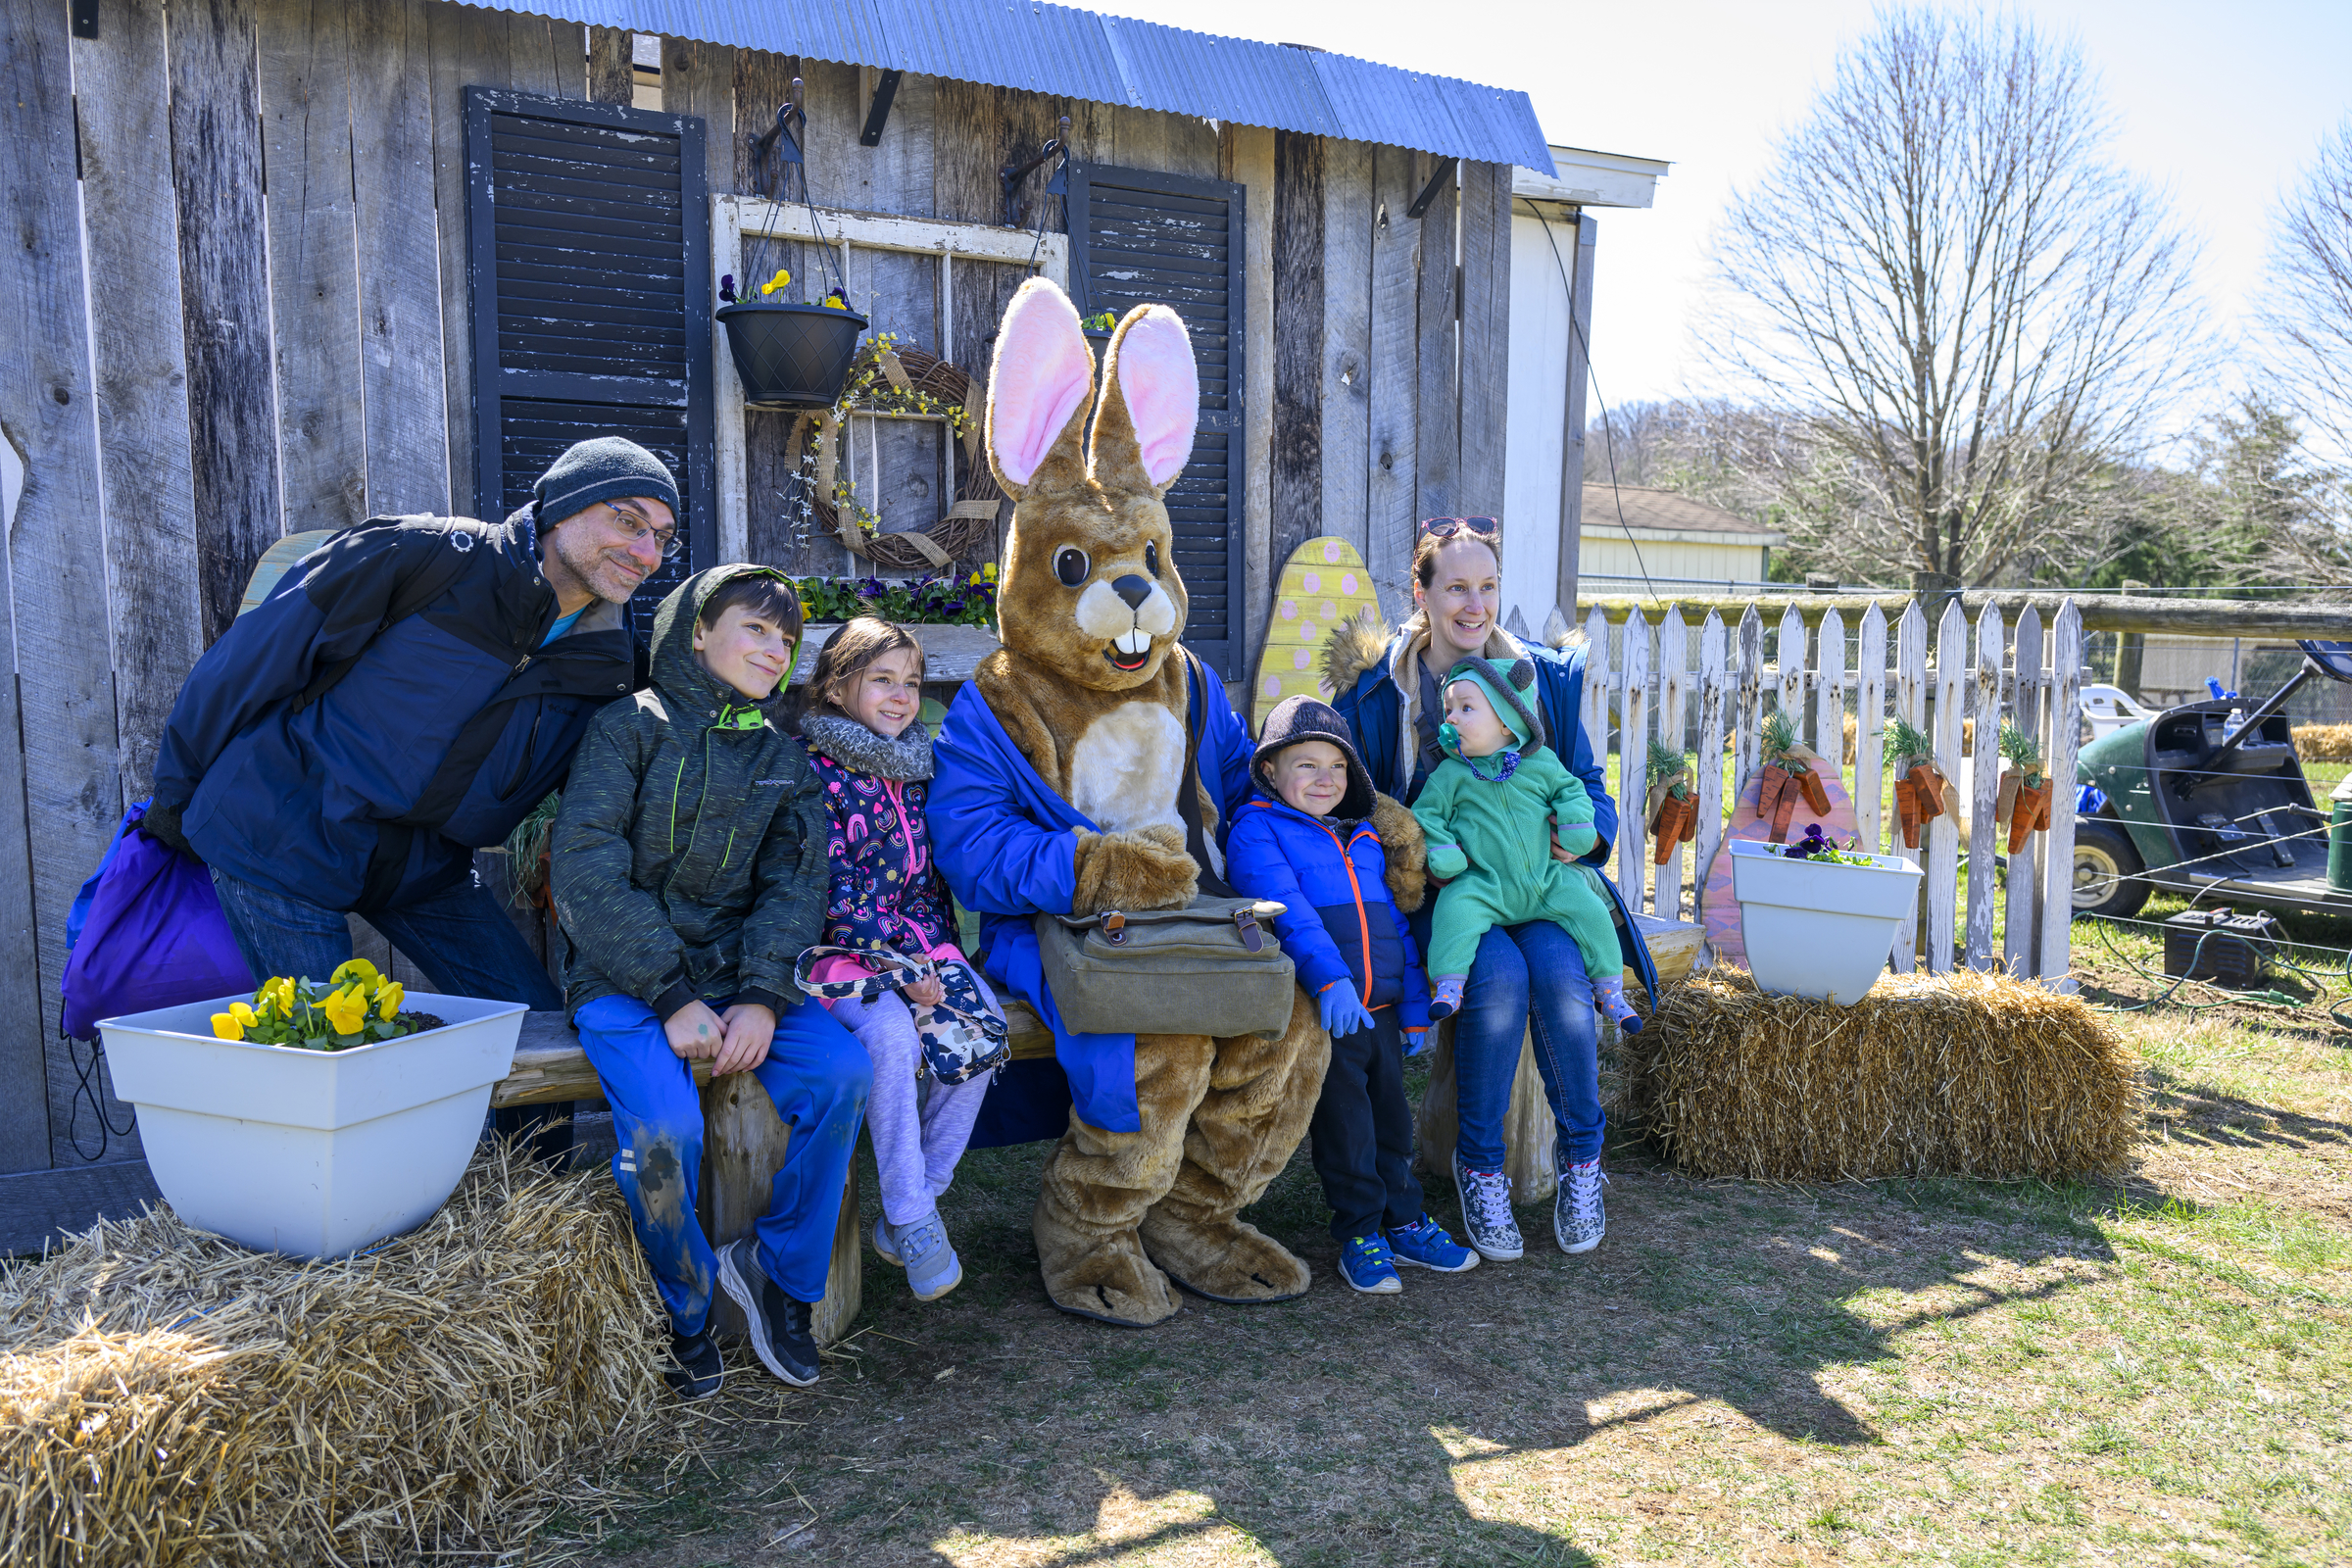 A family poses with the Easter Bunny during the Coppermine Eggstravaganza at Cascade Park in Hampstead. (Thomas Walker/Freelance)